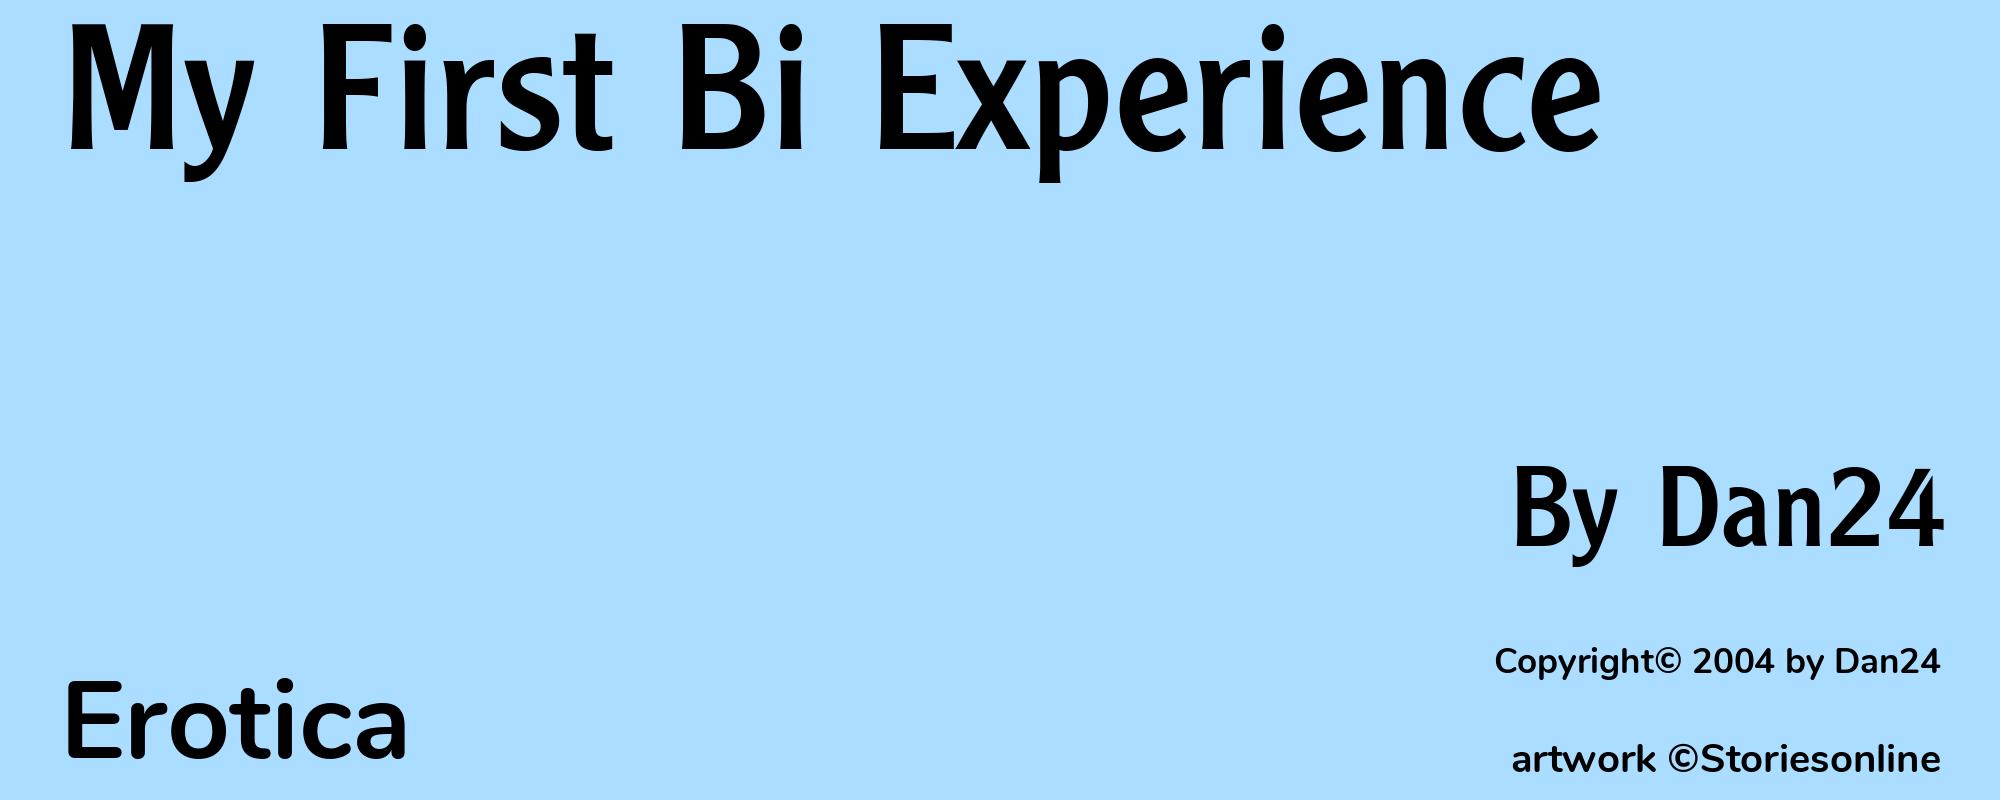 My First Bi Experience - Cover